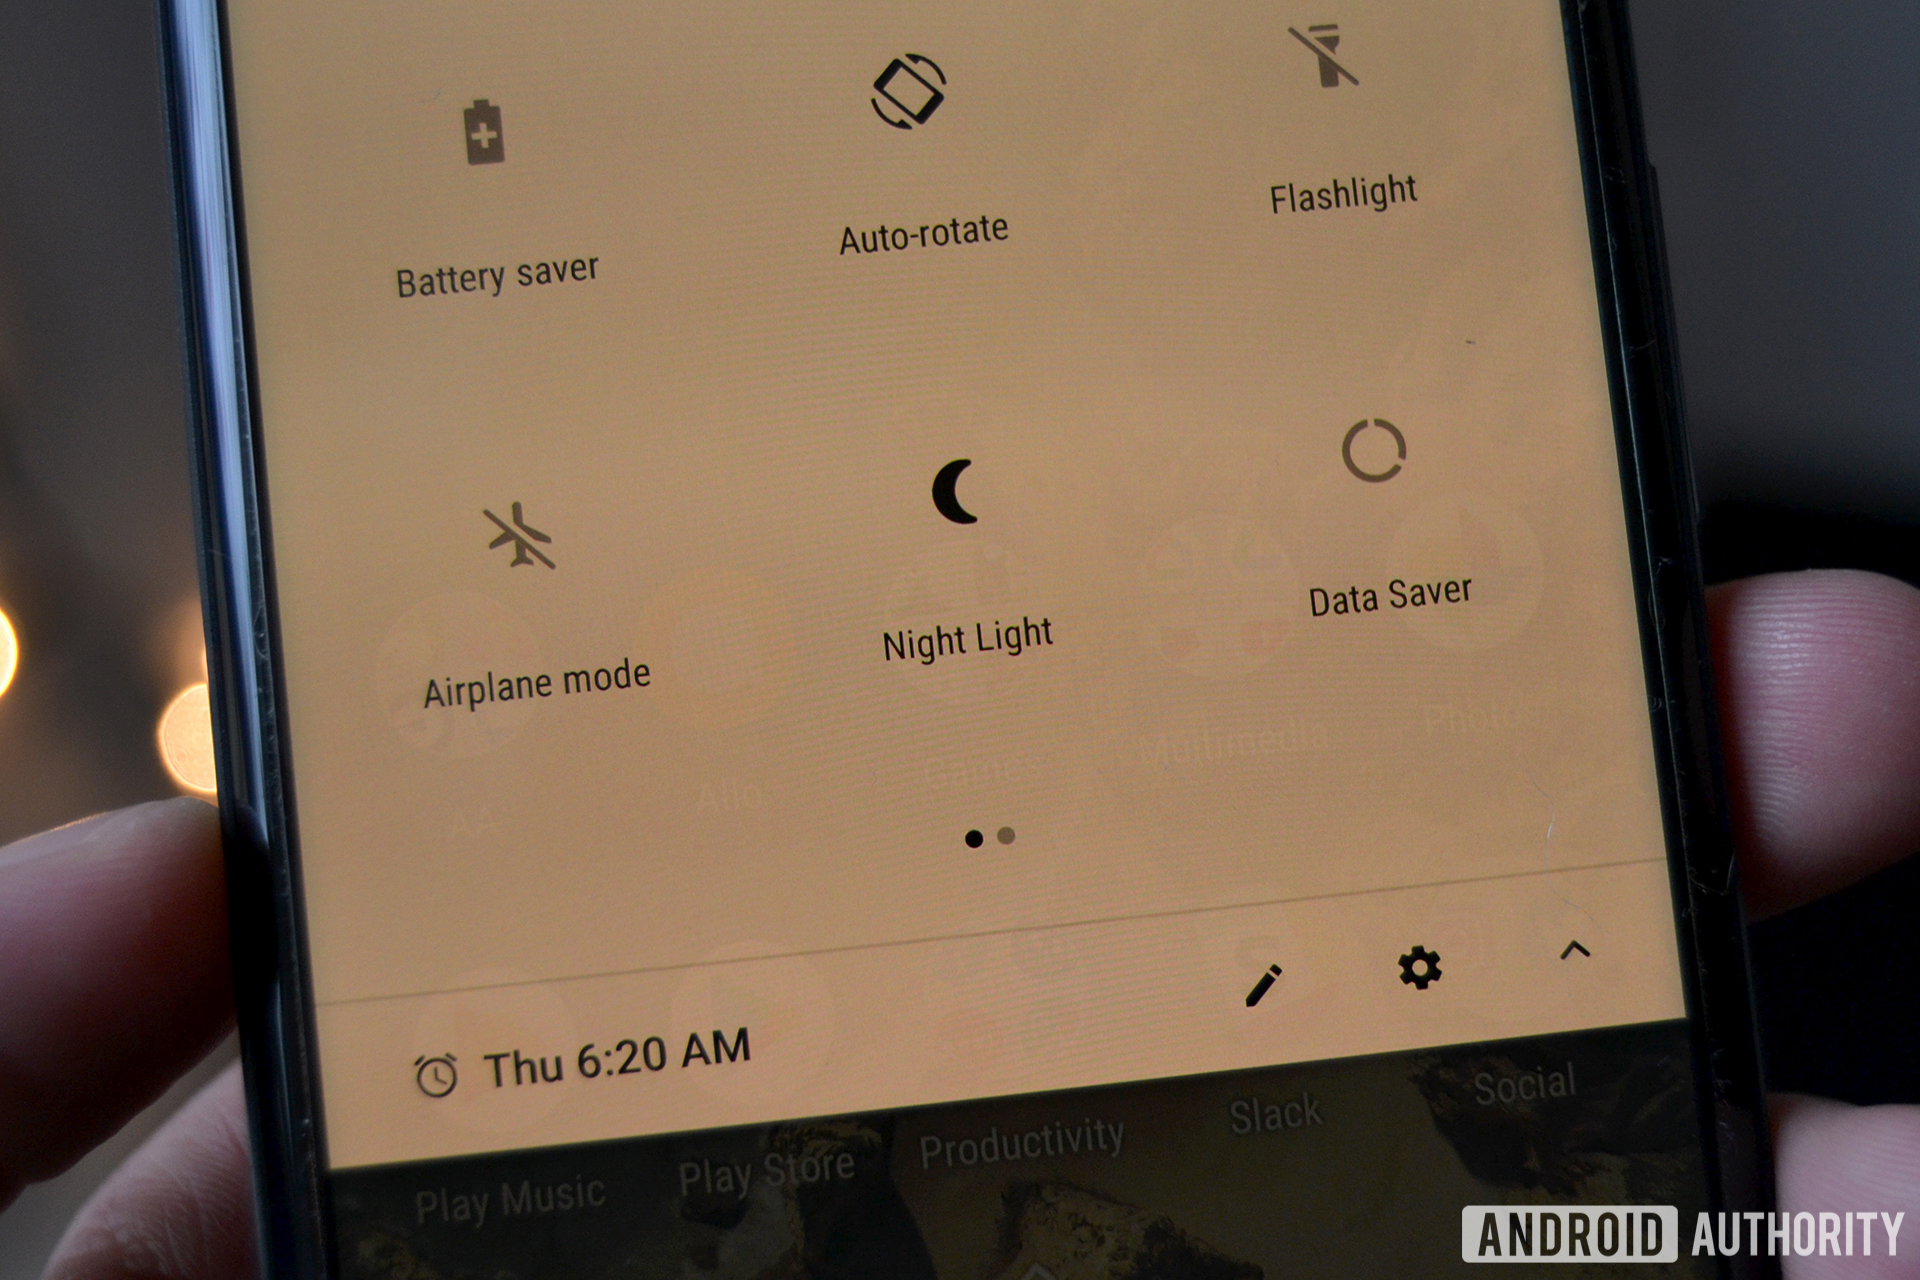 How to turn on night mode on an Android device